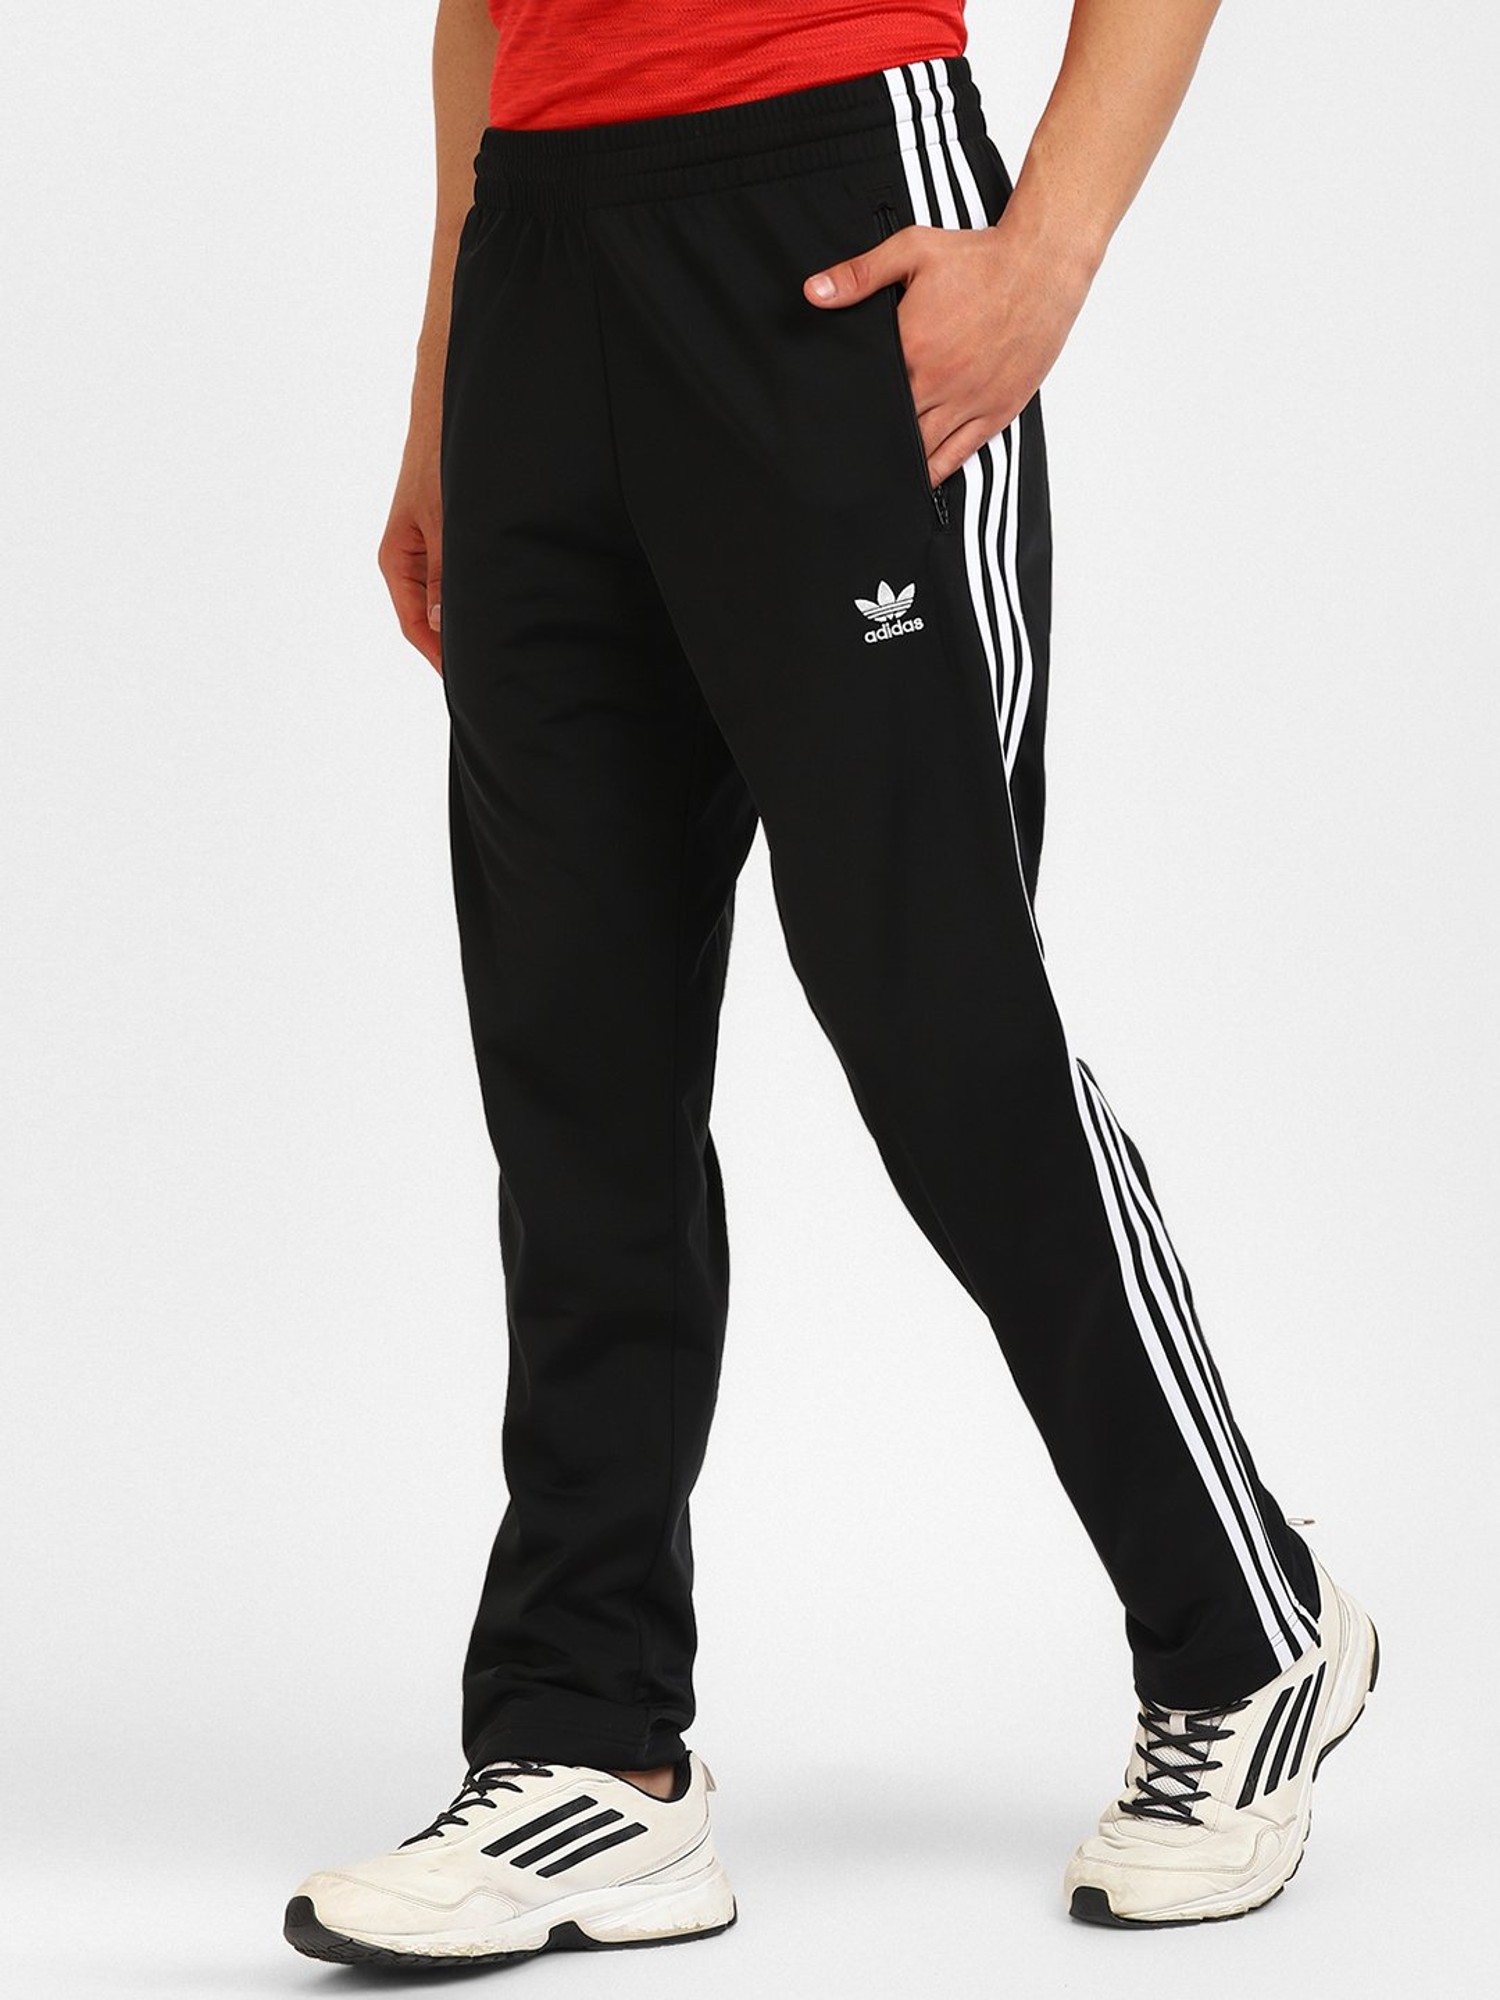 adidas Originals Womens Large Logo Track Pants Charcoal Solid GreyWhite  2XS  Amazonin Clothing  Accessories